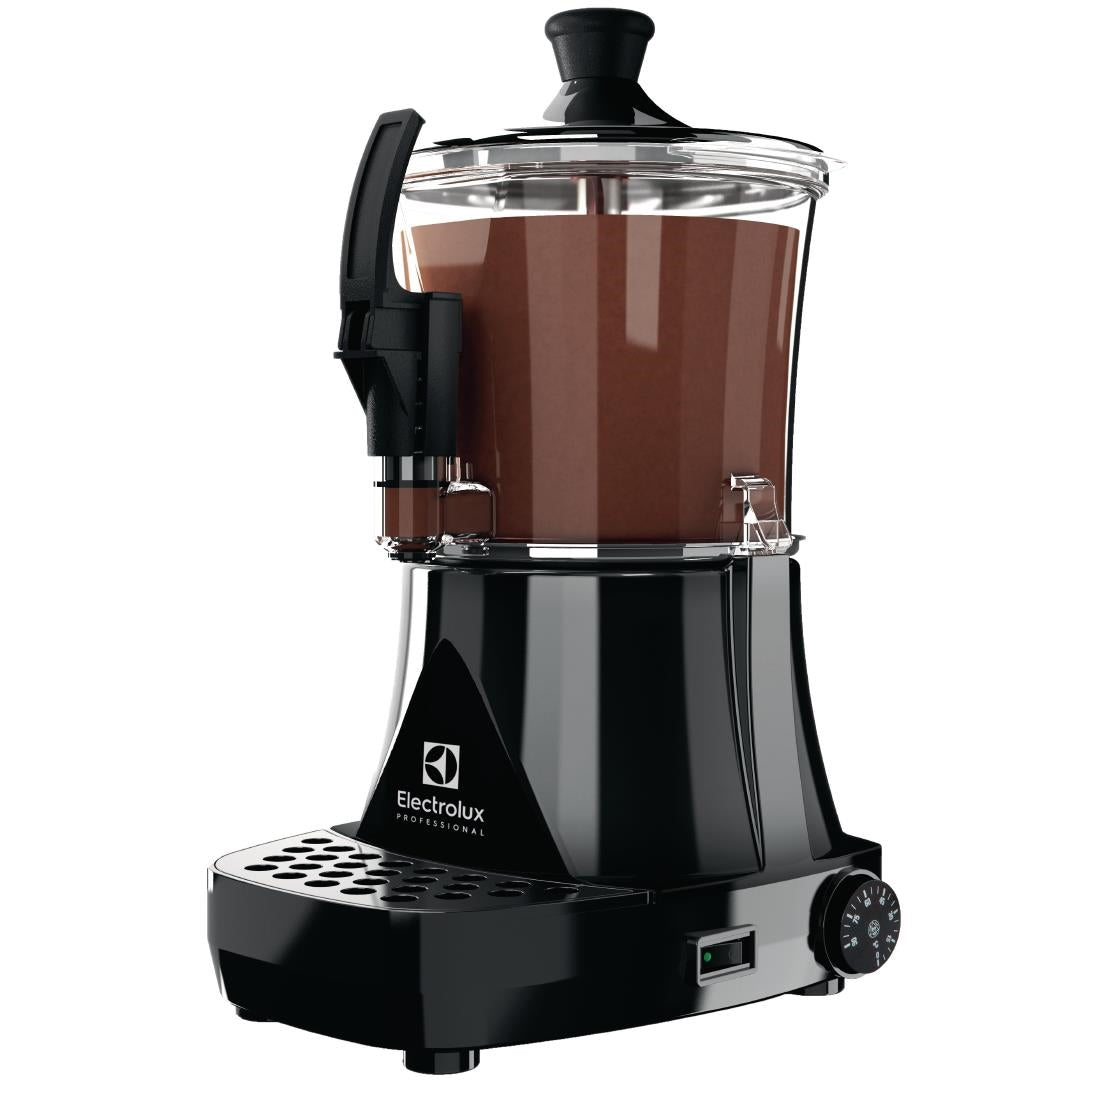 FW799 Electrolux Hot Chocolate Dispenser 6Ltr JD Catering Equipment Solutions Ltd